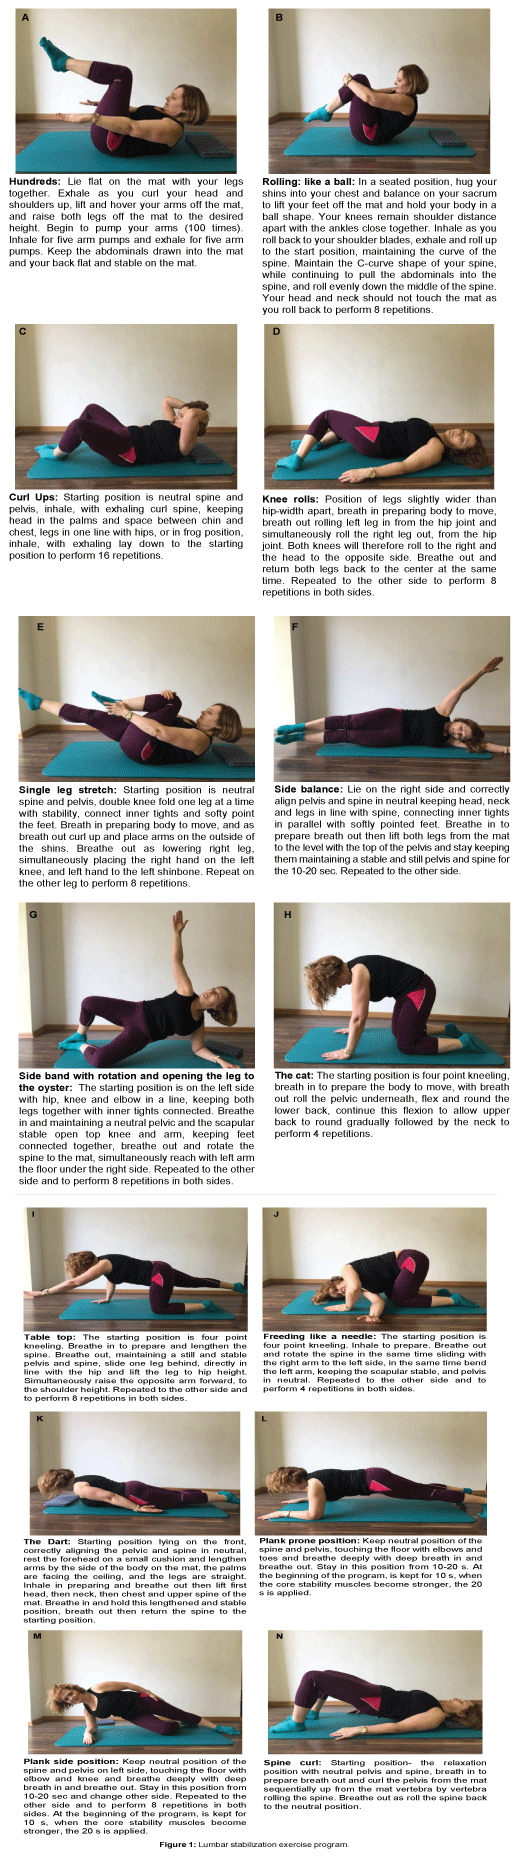 https://www.omicsonline.org/publication-images/pain-relief-Lumbar-stabilization-exercise-7-309-g001.png